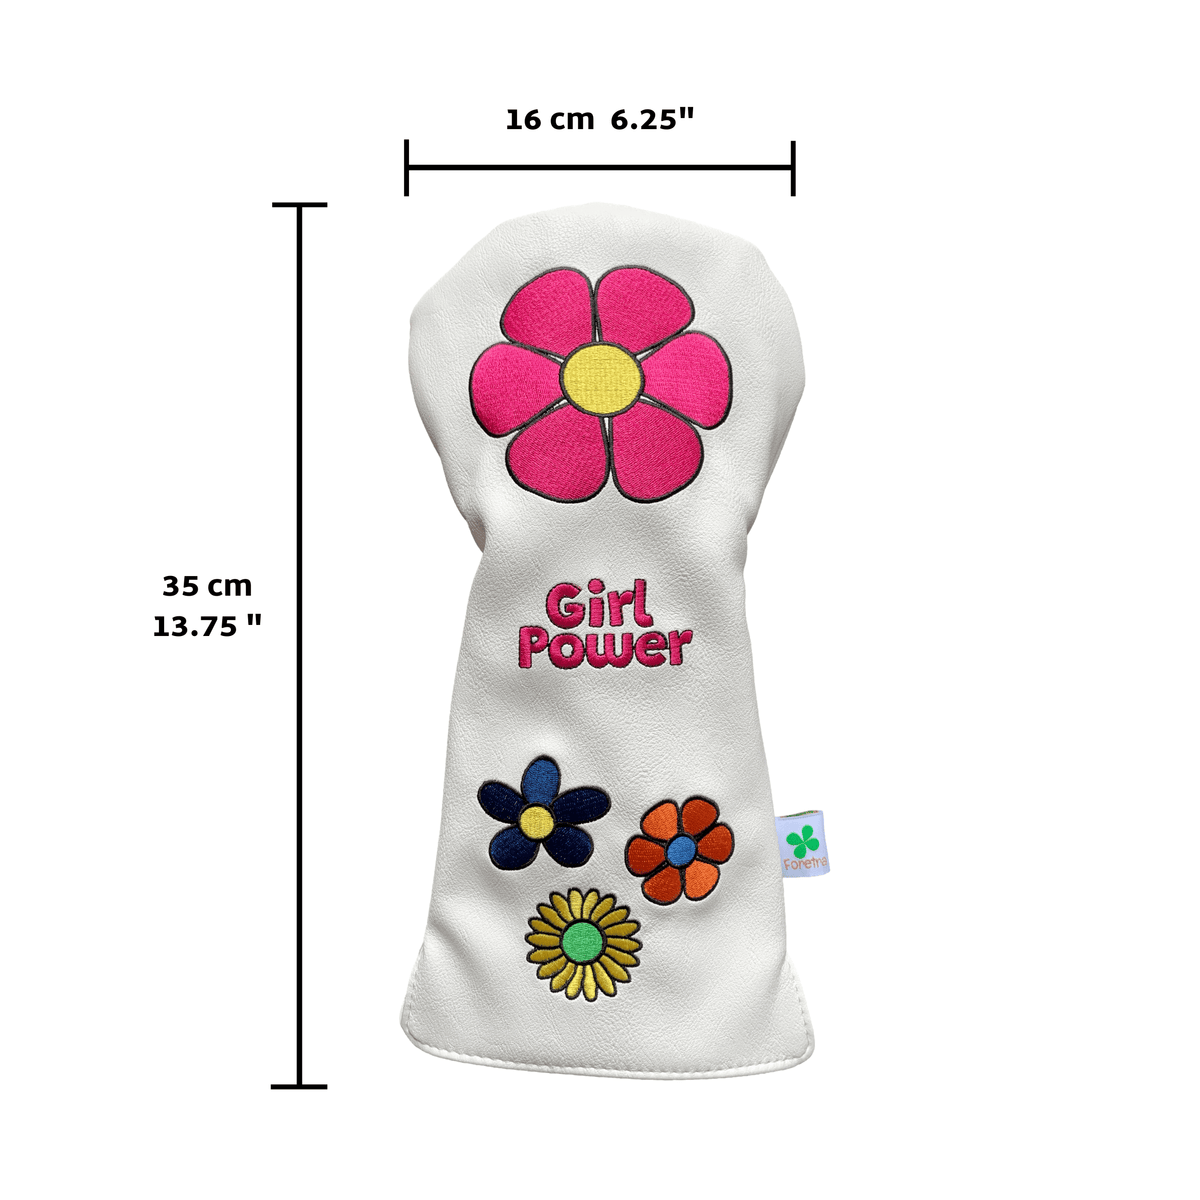 Girl Power - Driver Head Cover